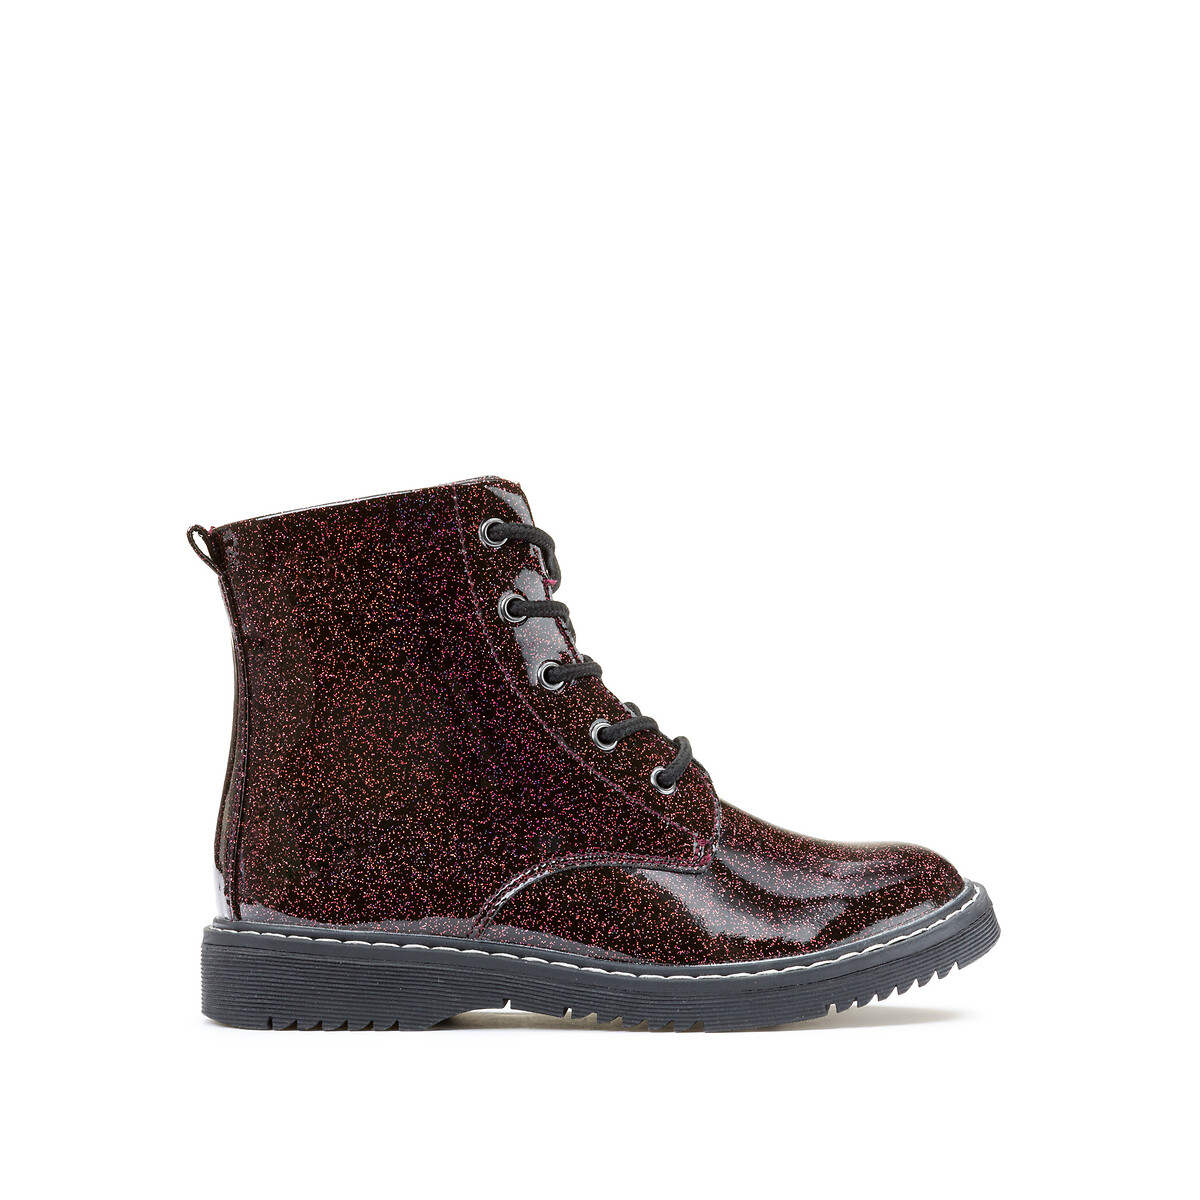 Kids Glittery Ankle Boots with Zip Fastening